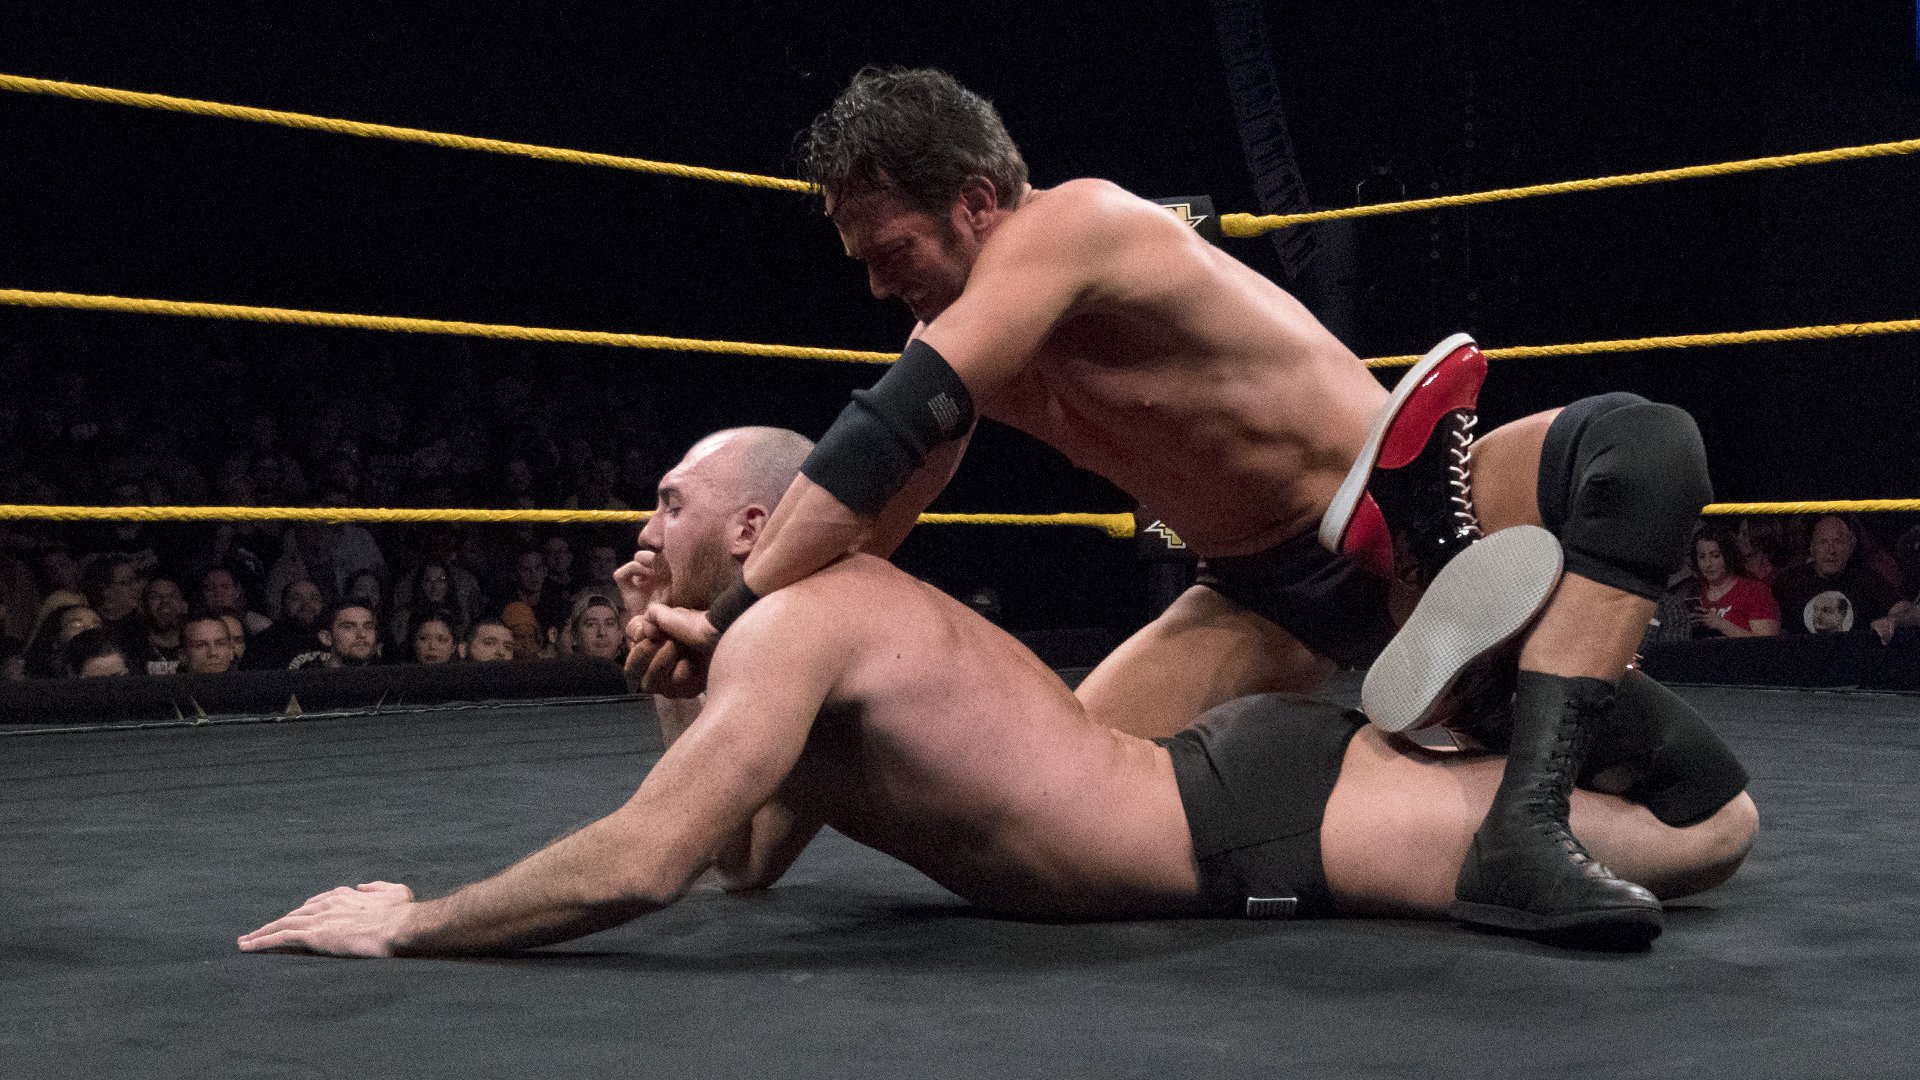 Roderick Strong & Pete Dunne def. Oney Lorcan & Danny Burch (Dusty Rhodes Tag Team Classic First-Round Match)